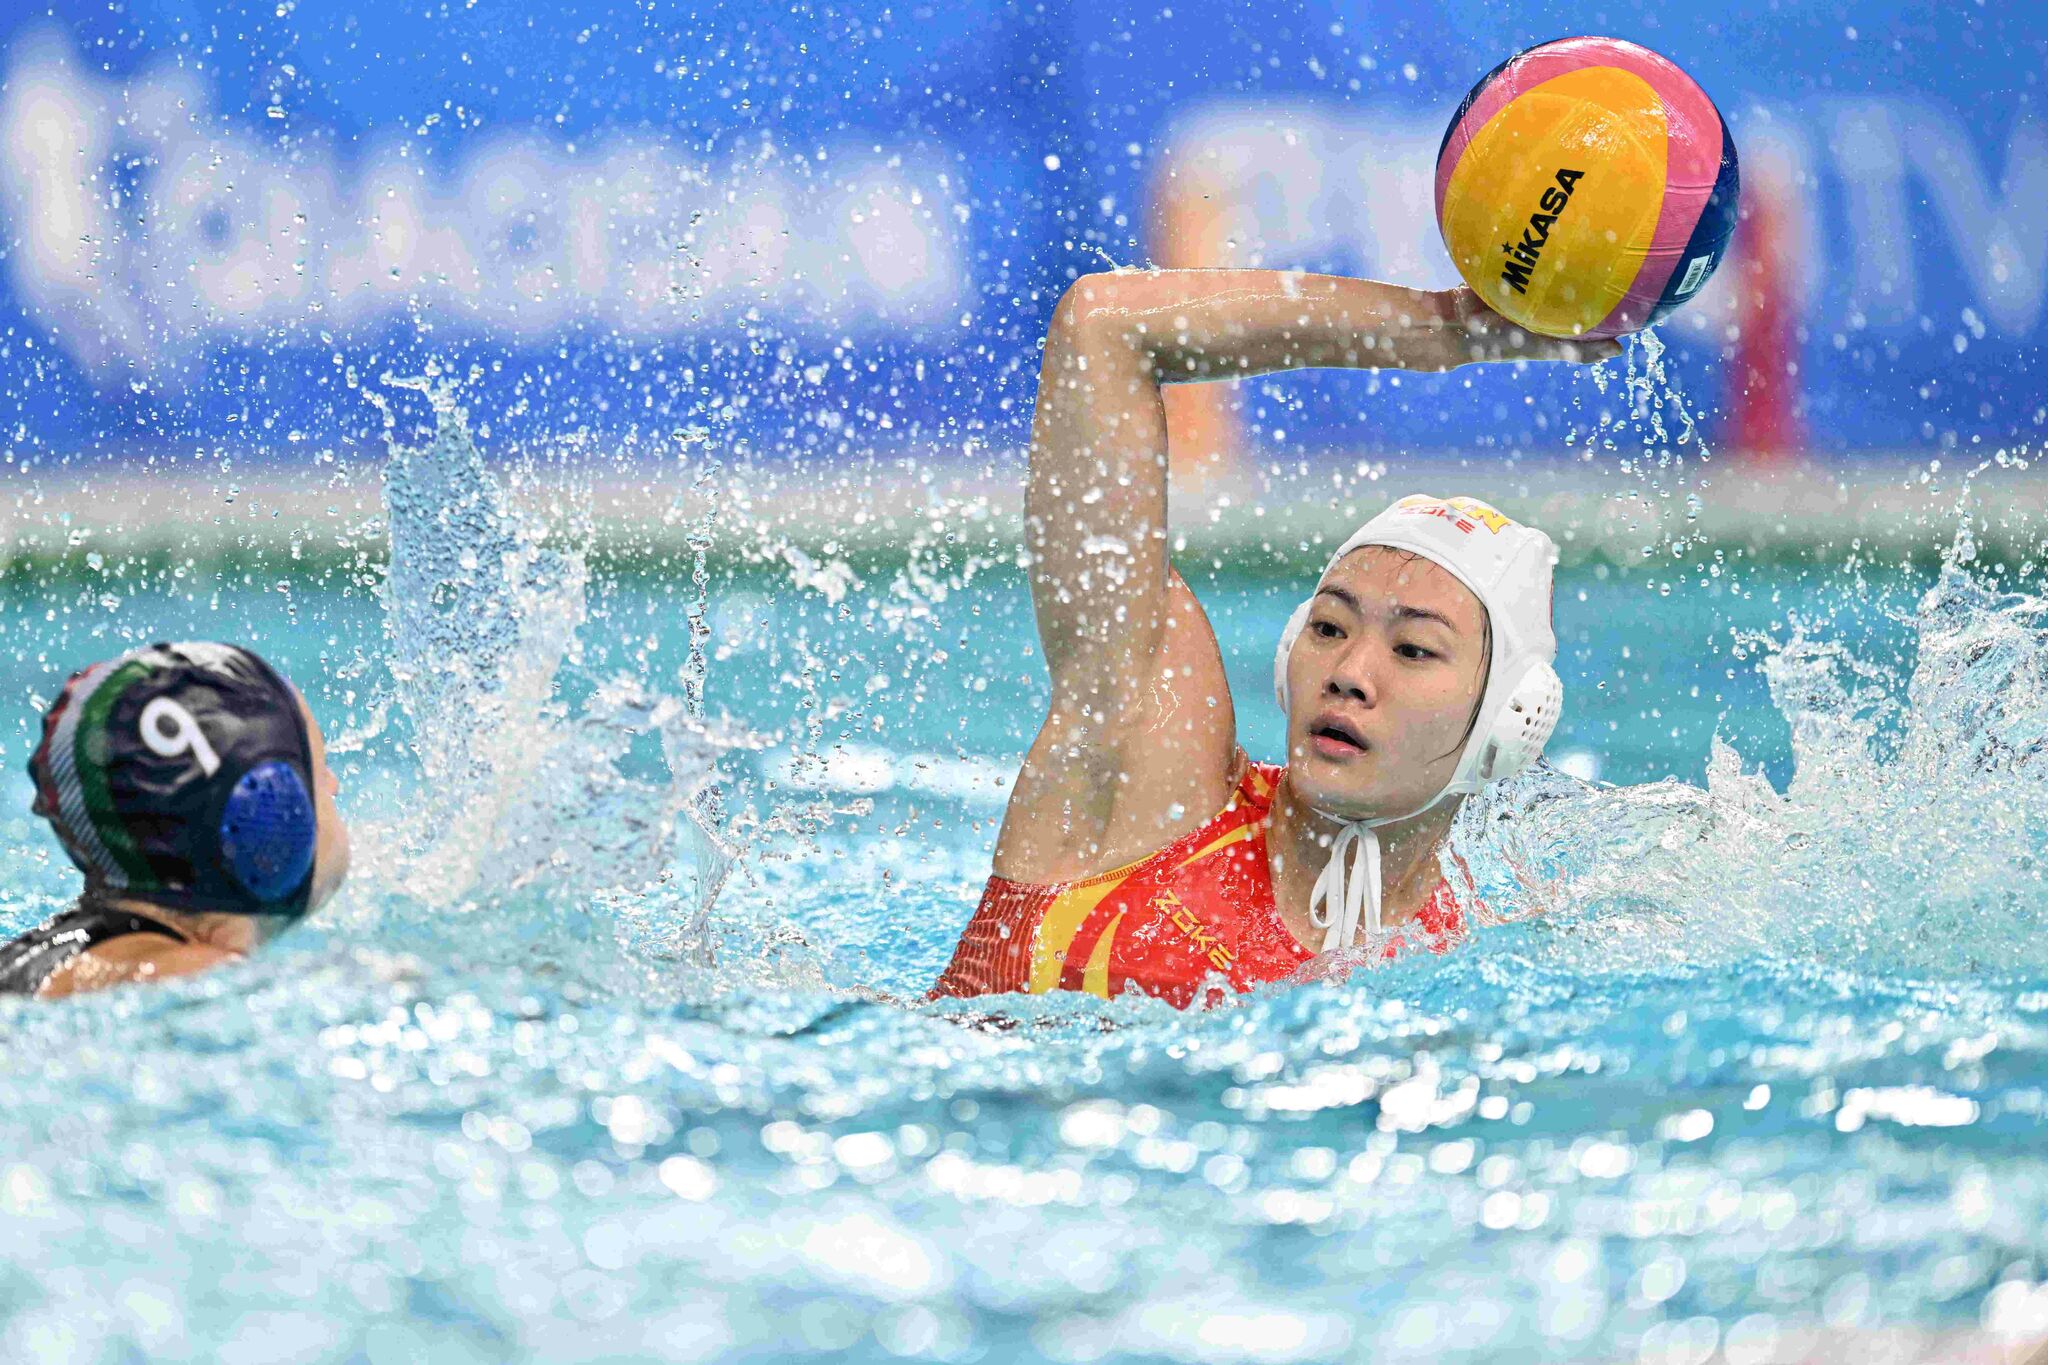 Greek know-how leads China to the first water polo title in 12 years - FISU